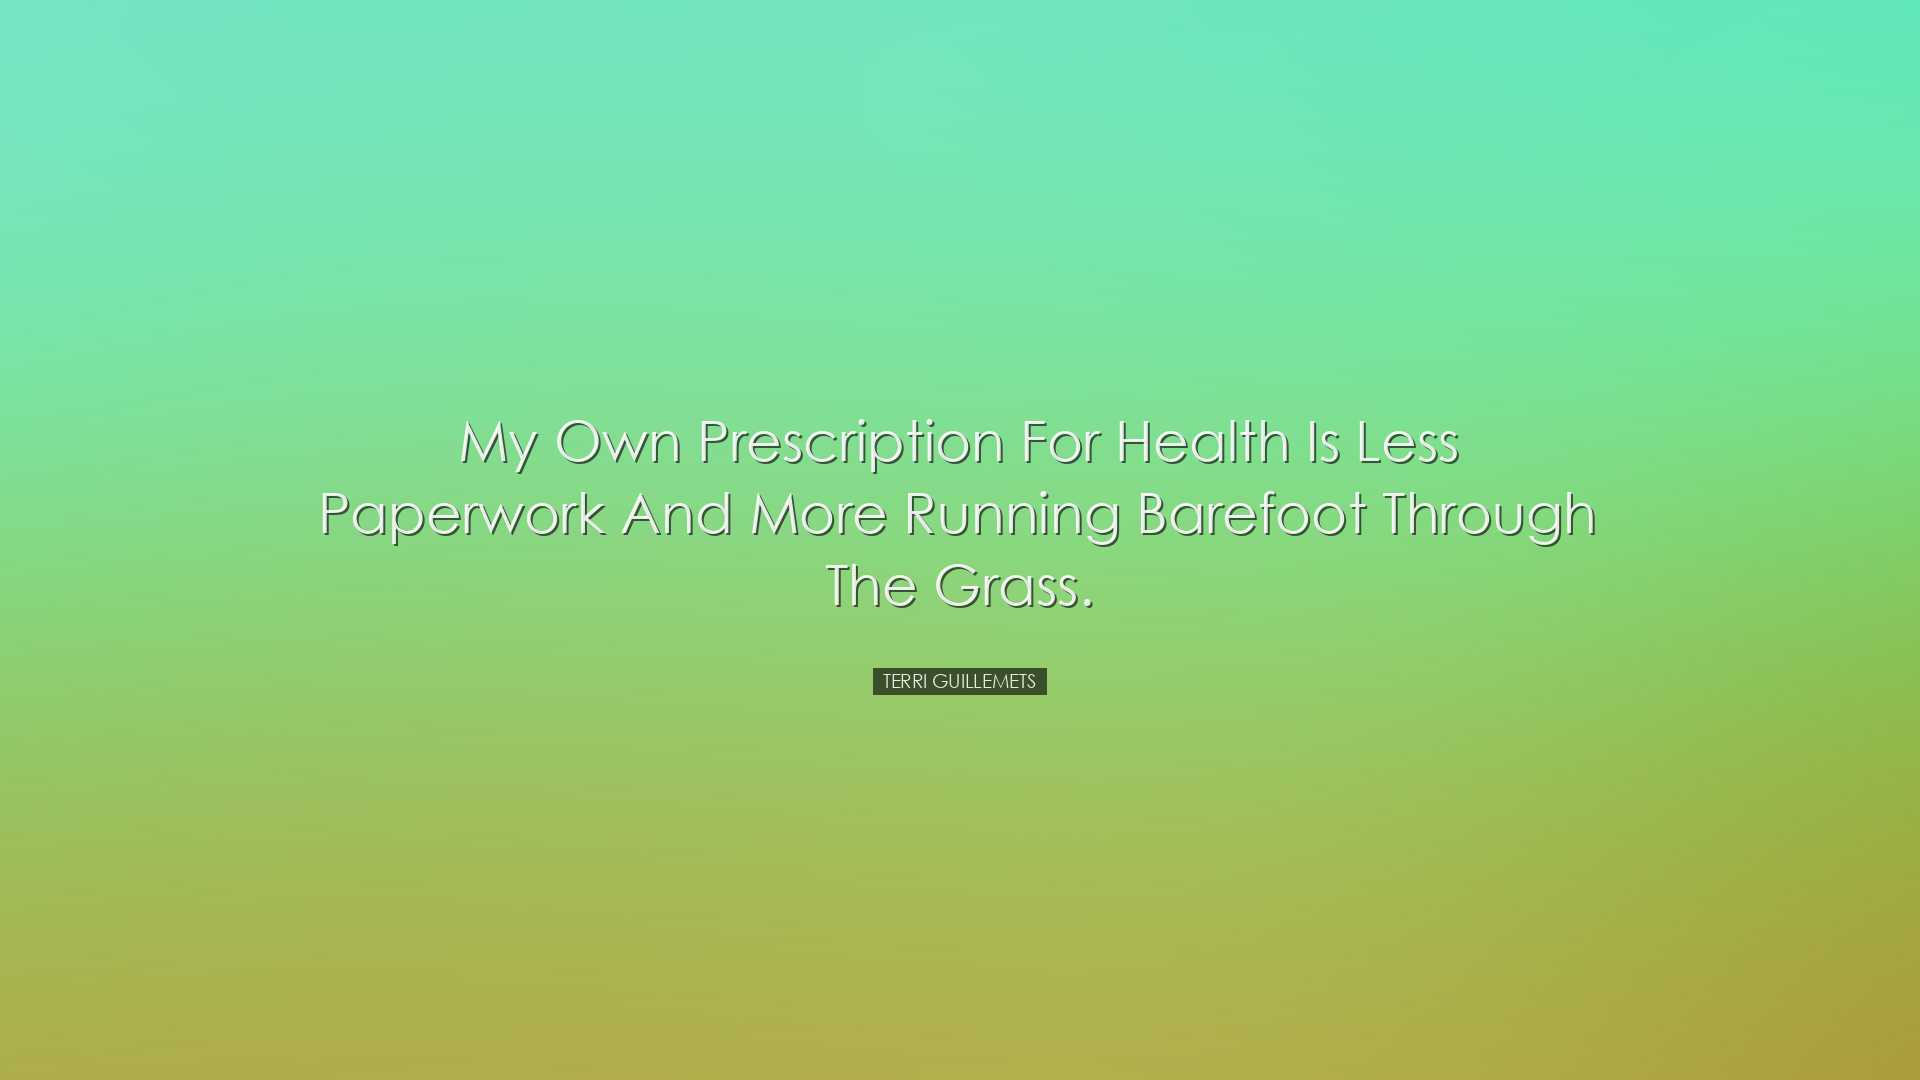 My own prescription for health is less paperwork and more running